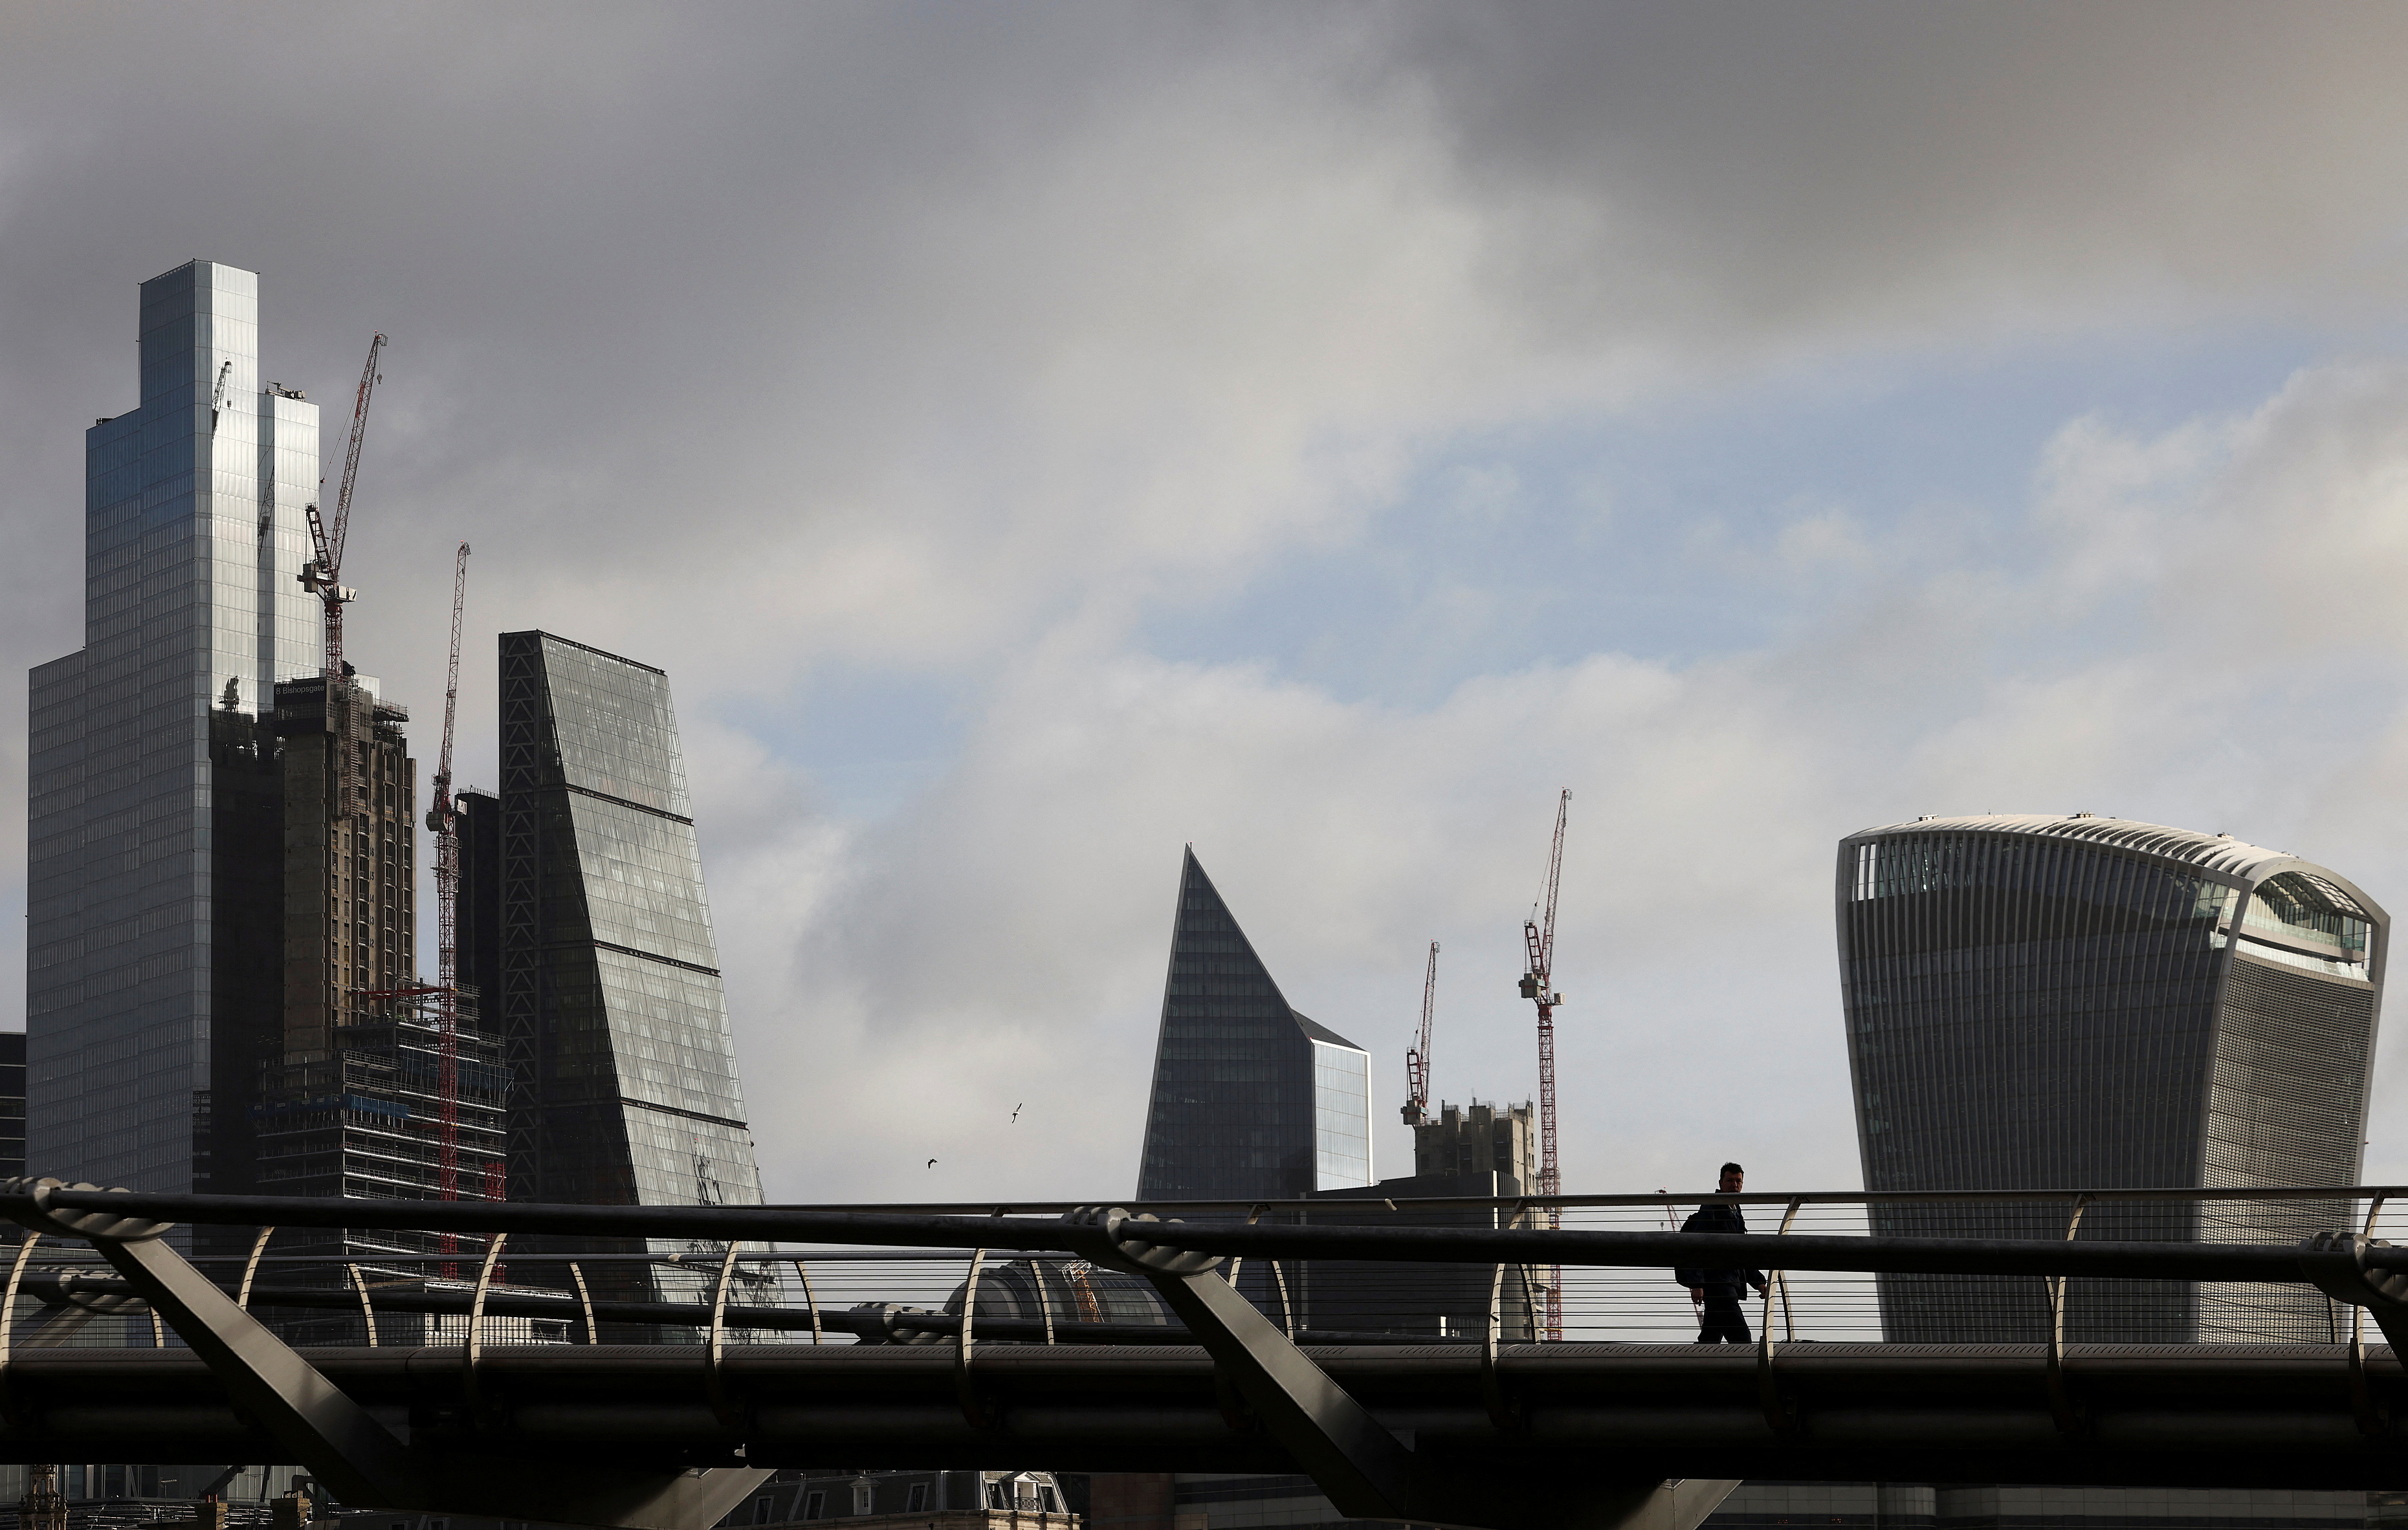 The City of London financial district is seen as people walk over Millennium Bridge in London